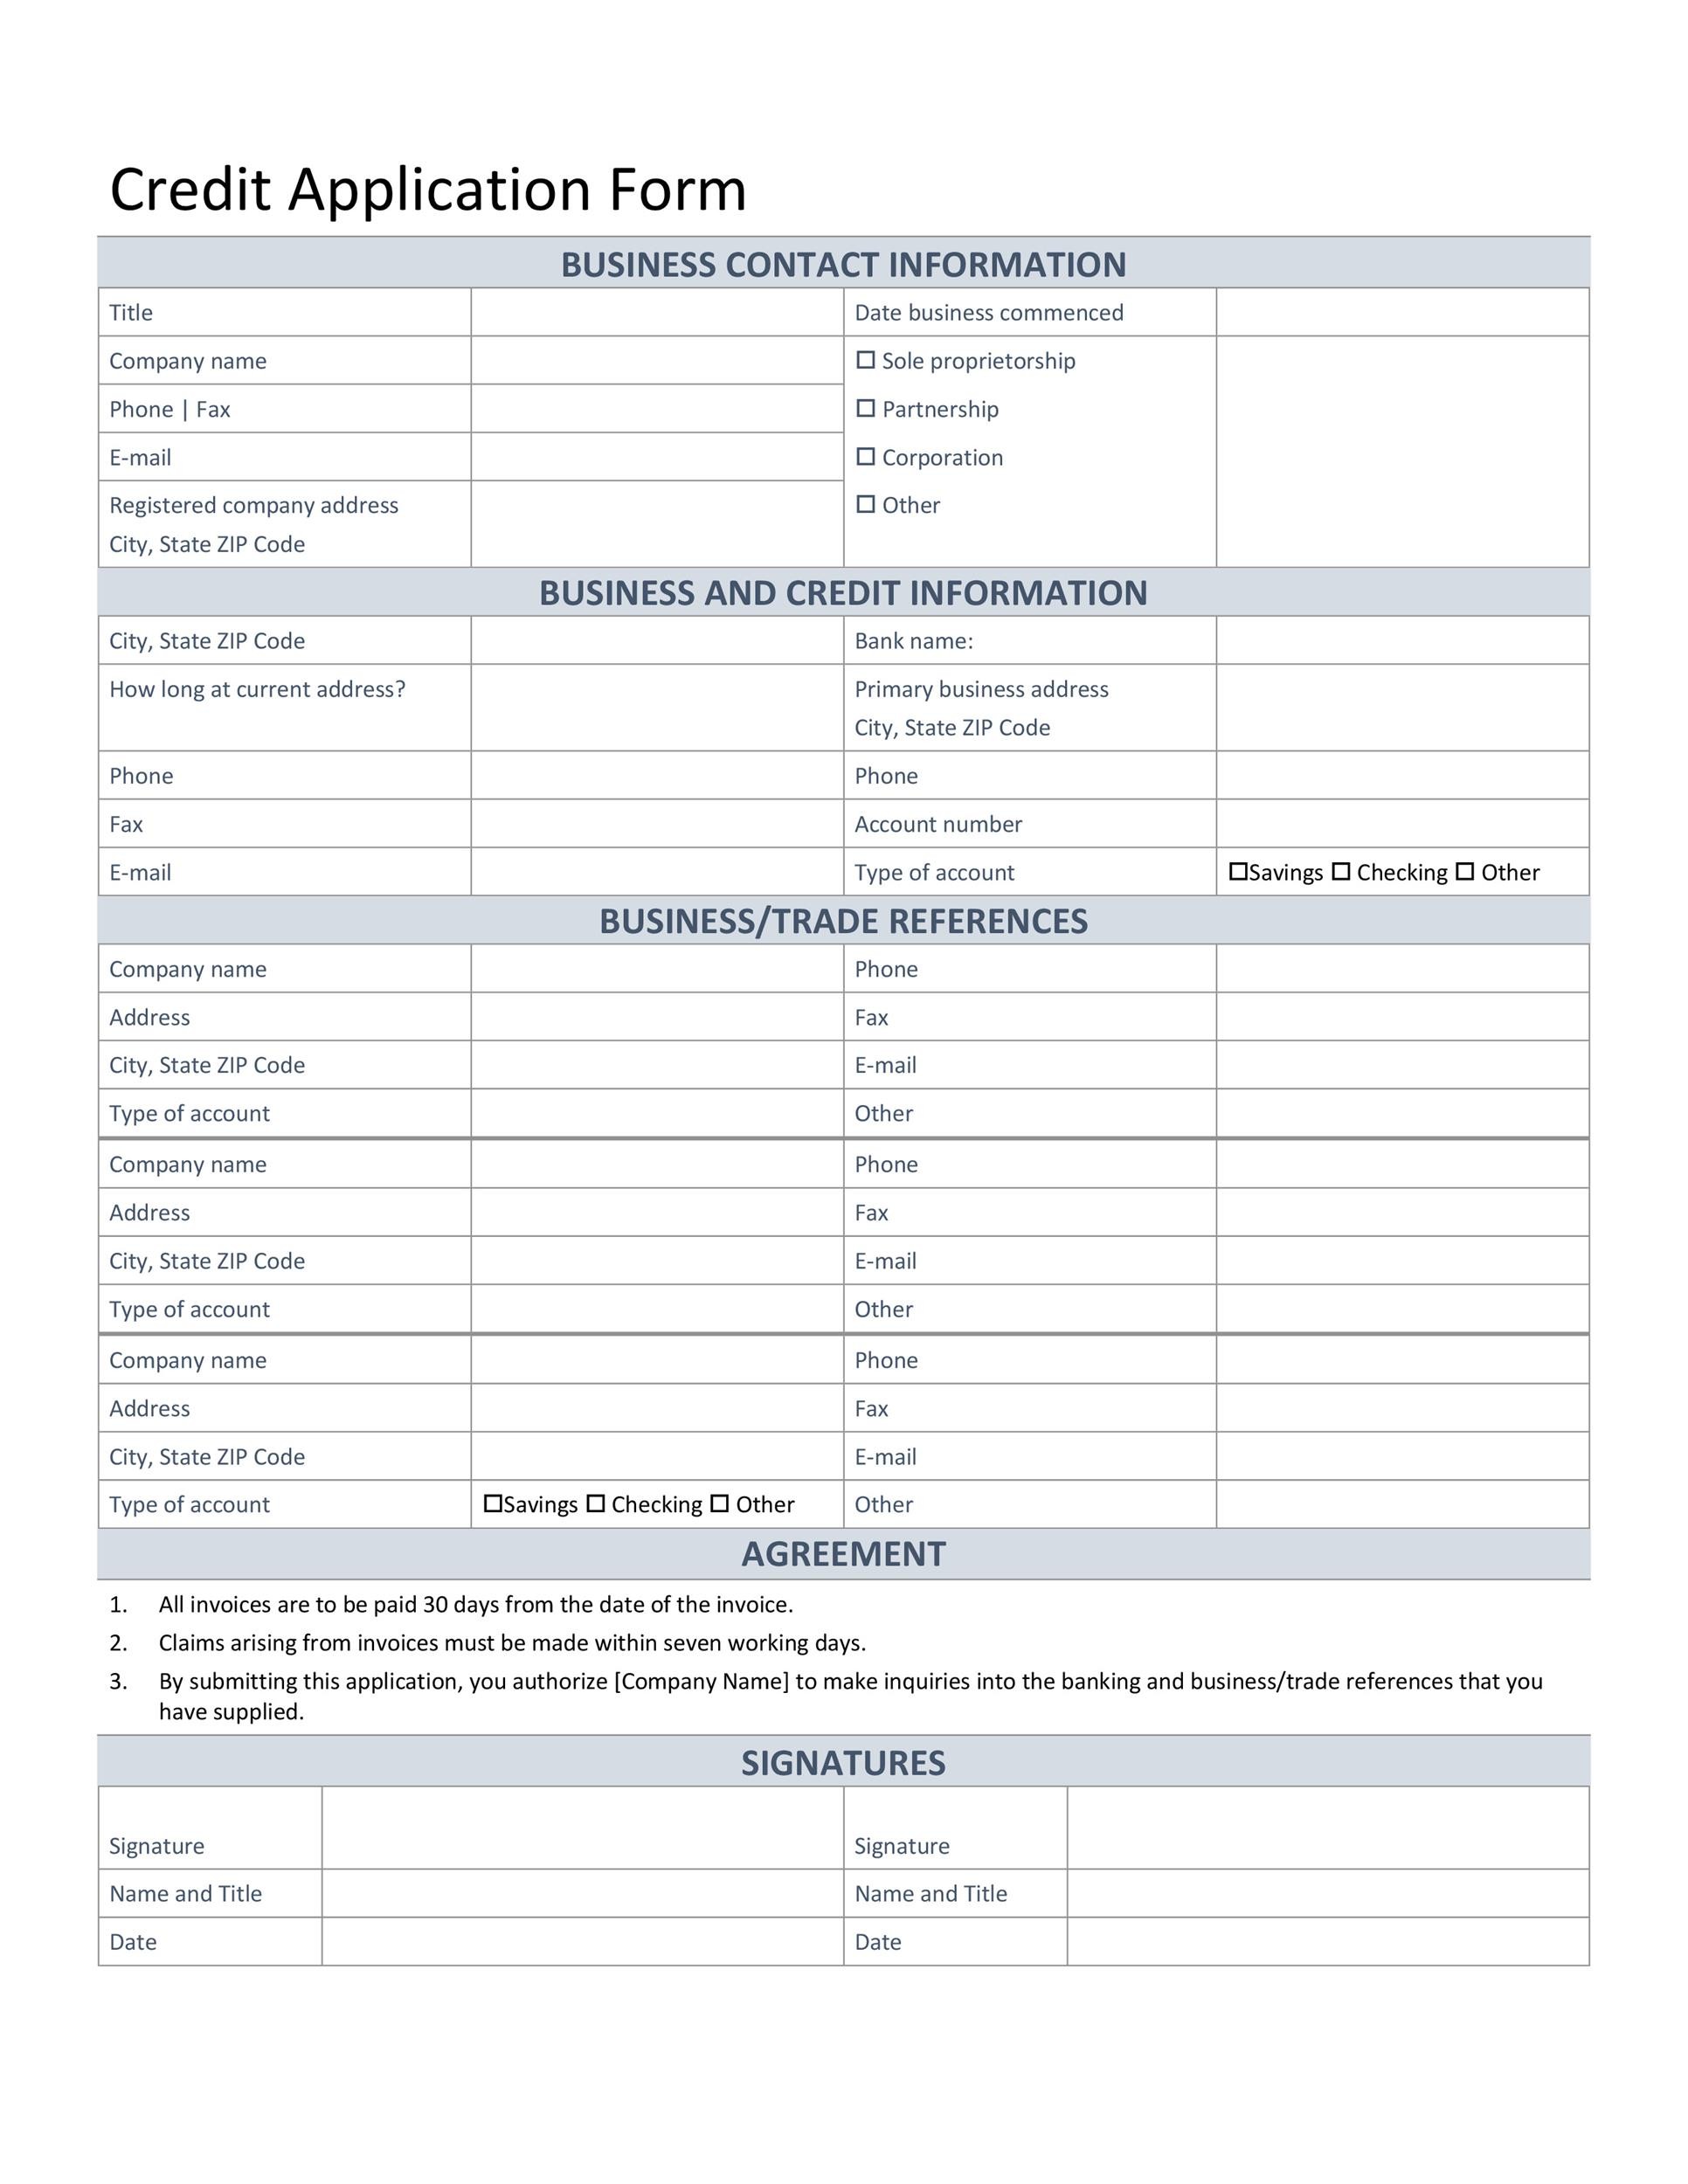 40 Free Credit Application Form Templates And Samples 7263